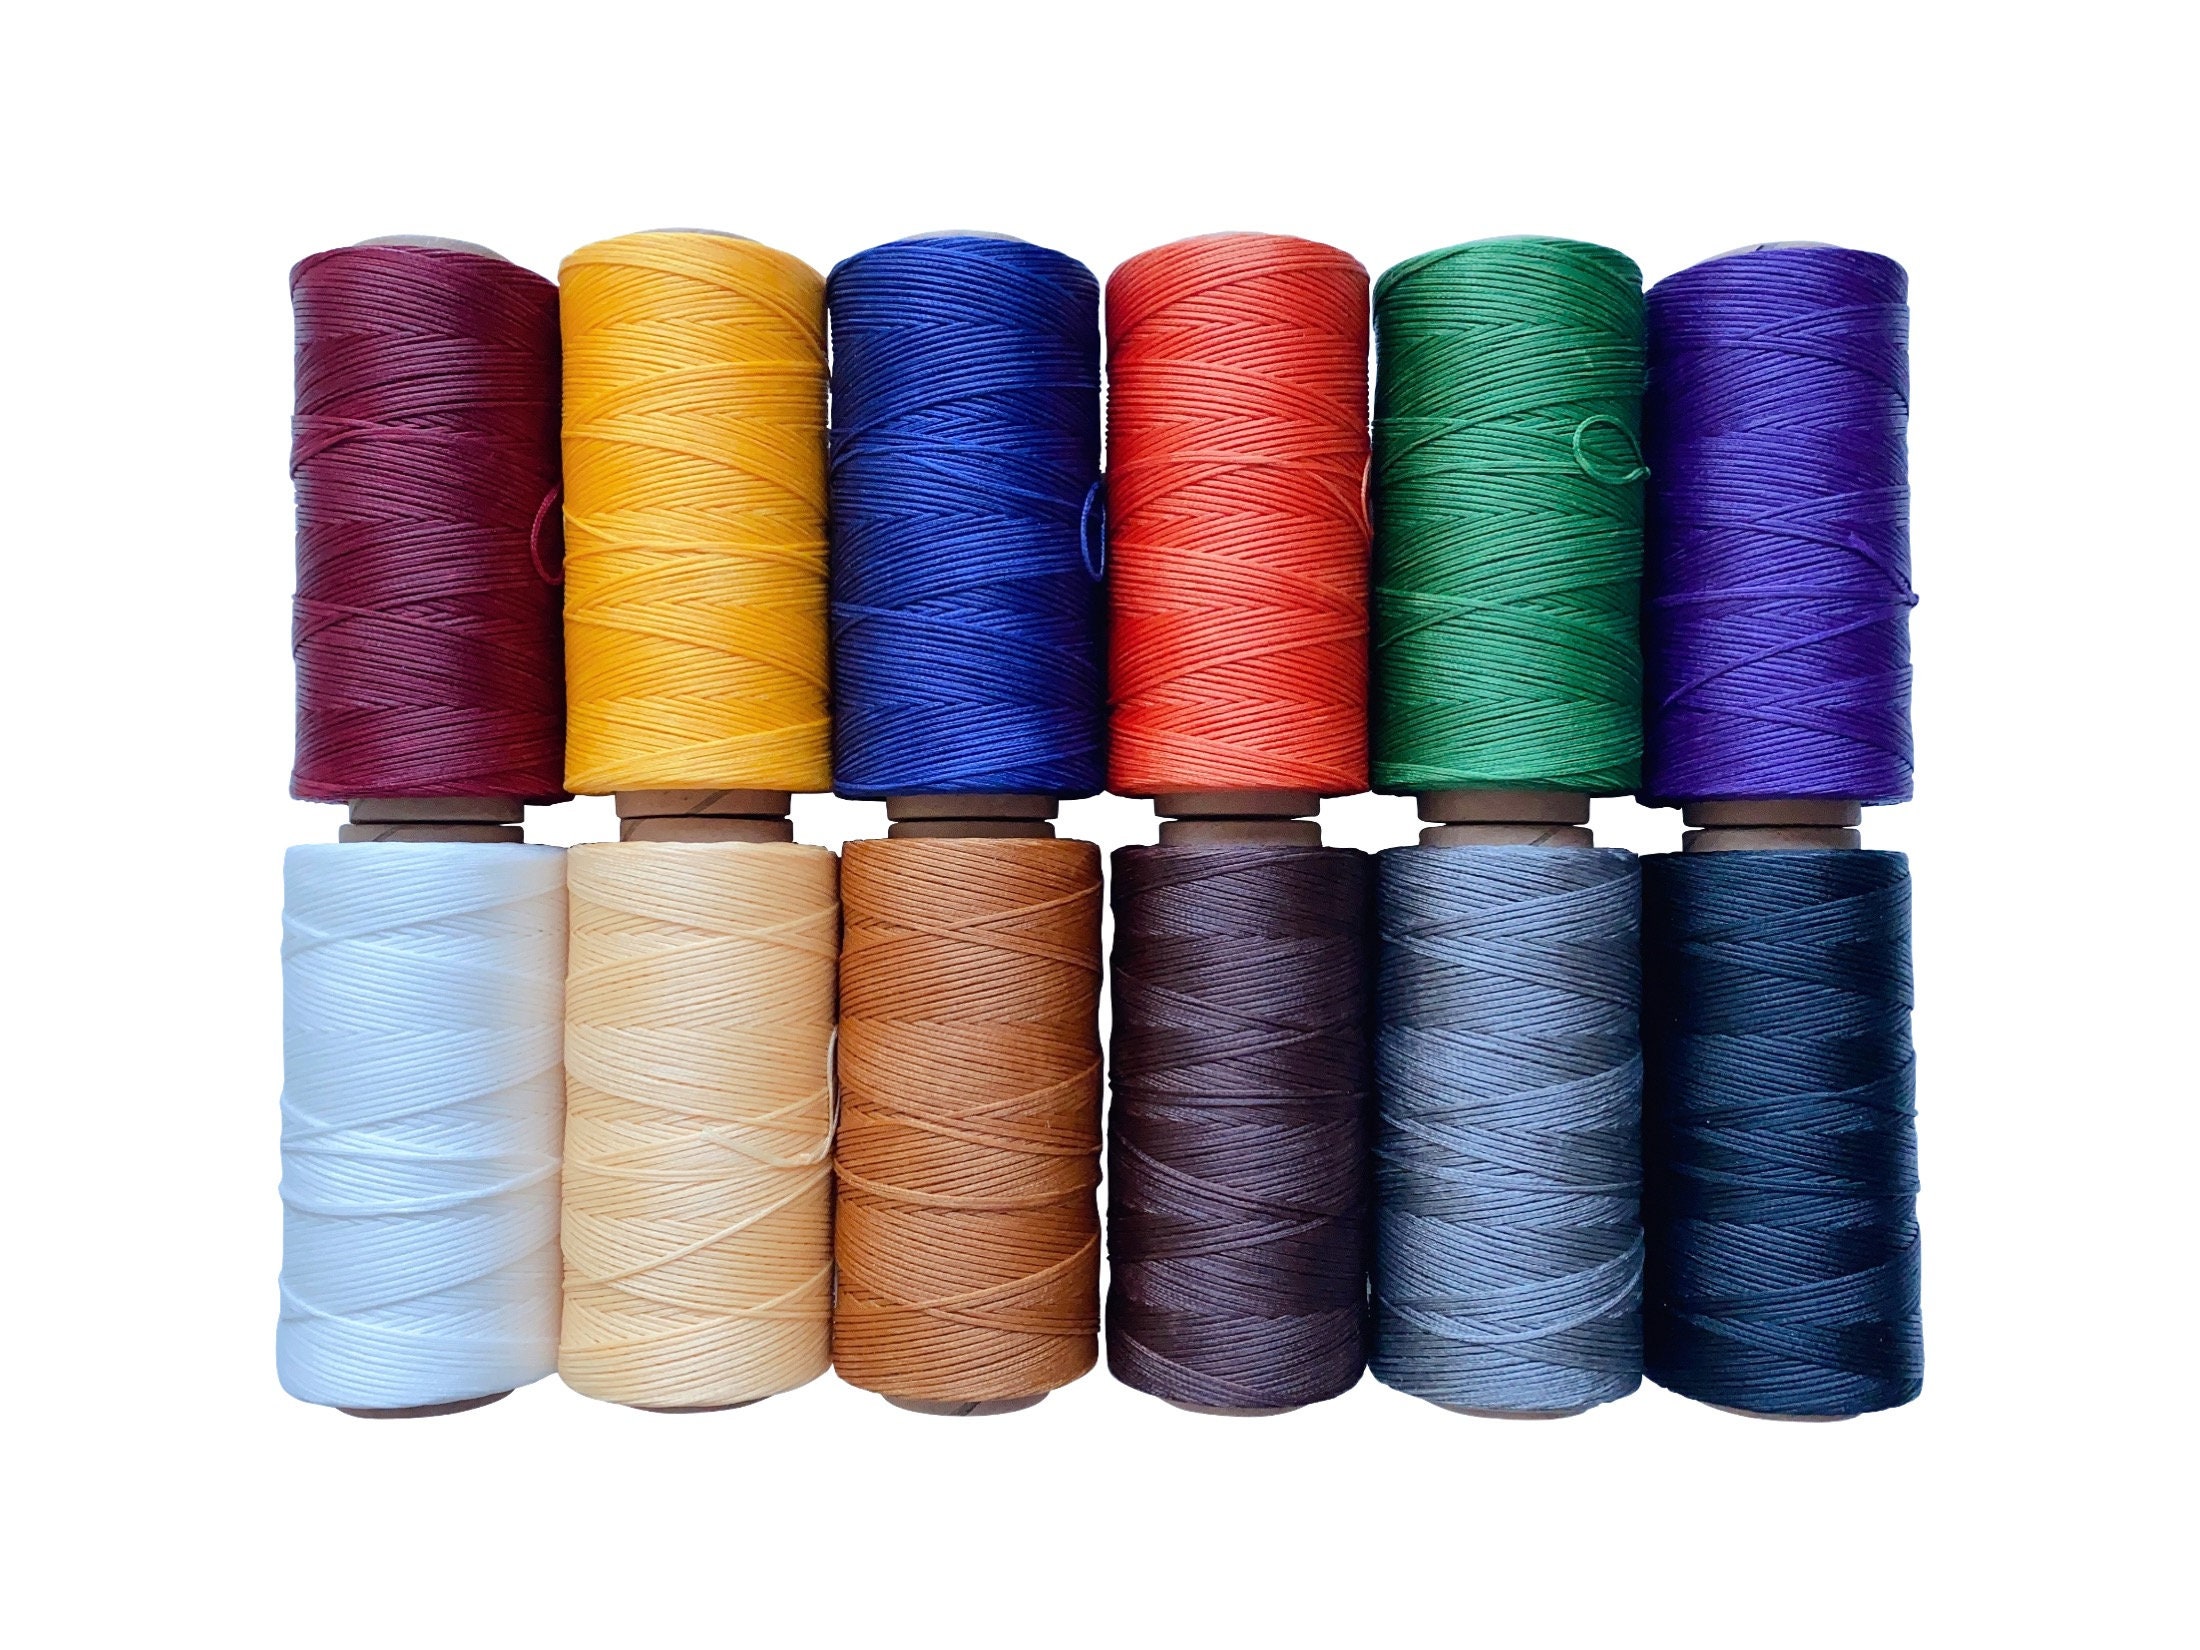 Craftuneed 100% Cotton Reel Spool Sewing Thread All Purpose Thread  3000yards Various Colour Choices per Roll 